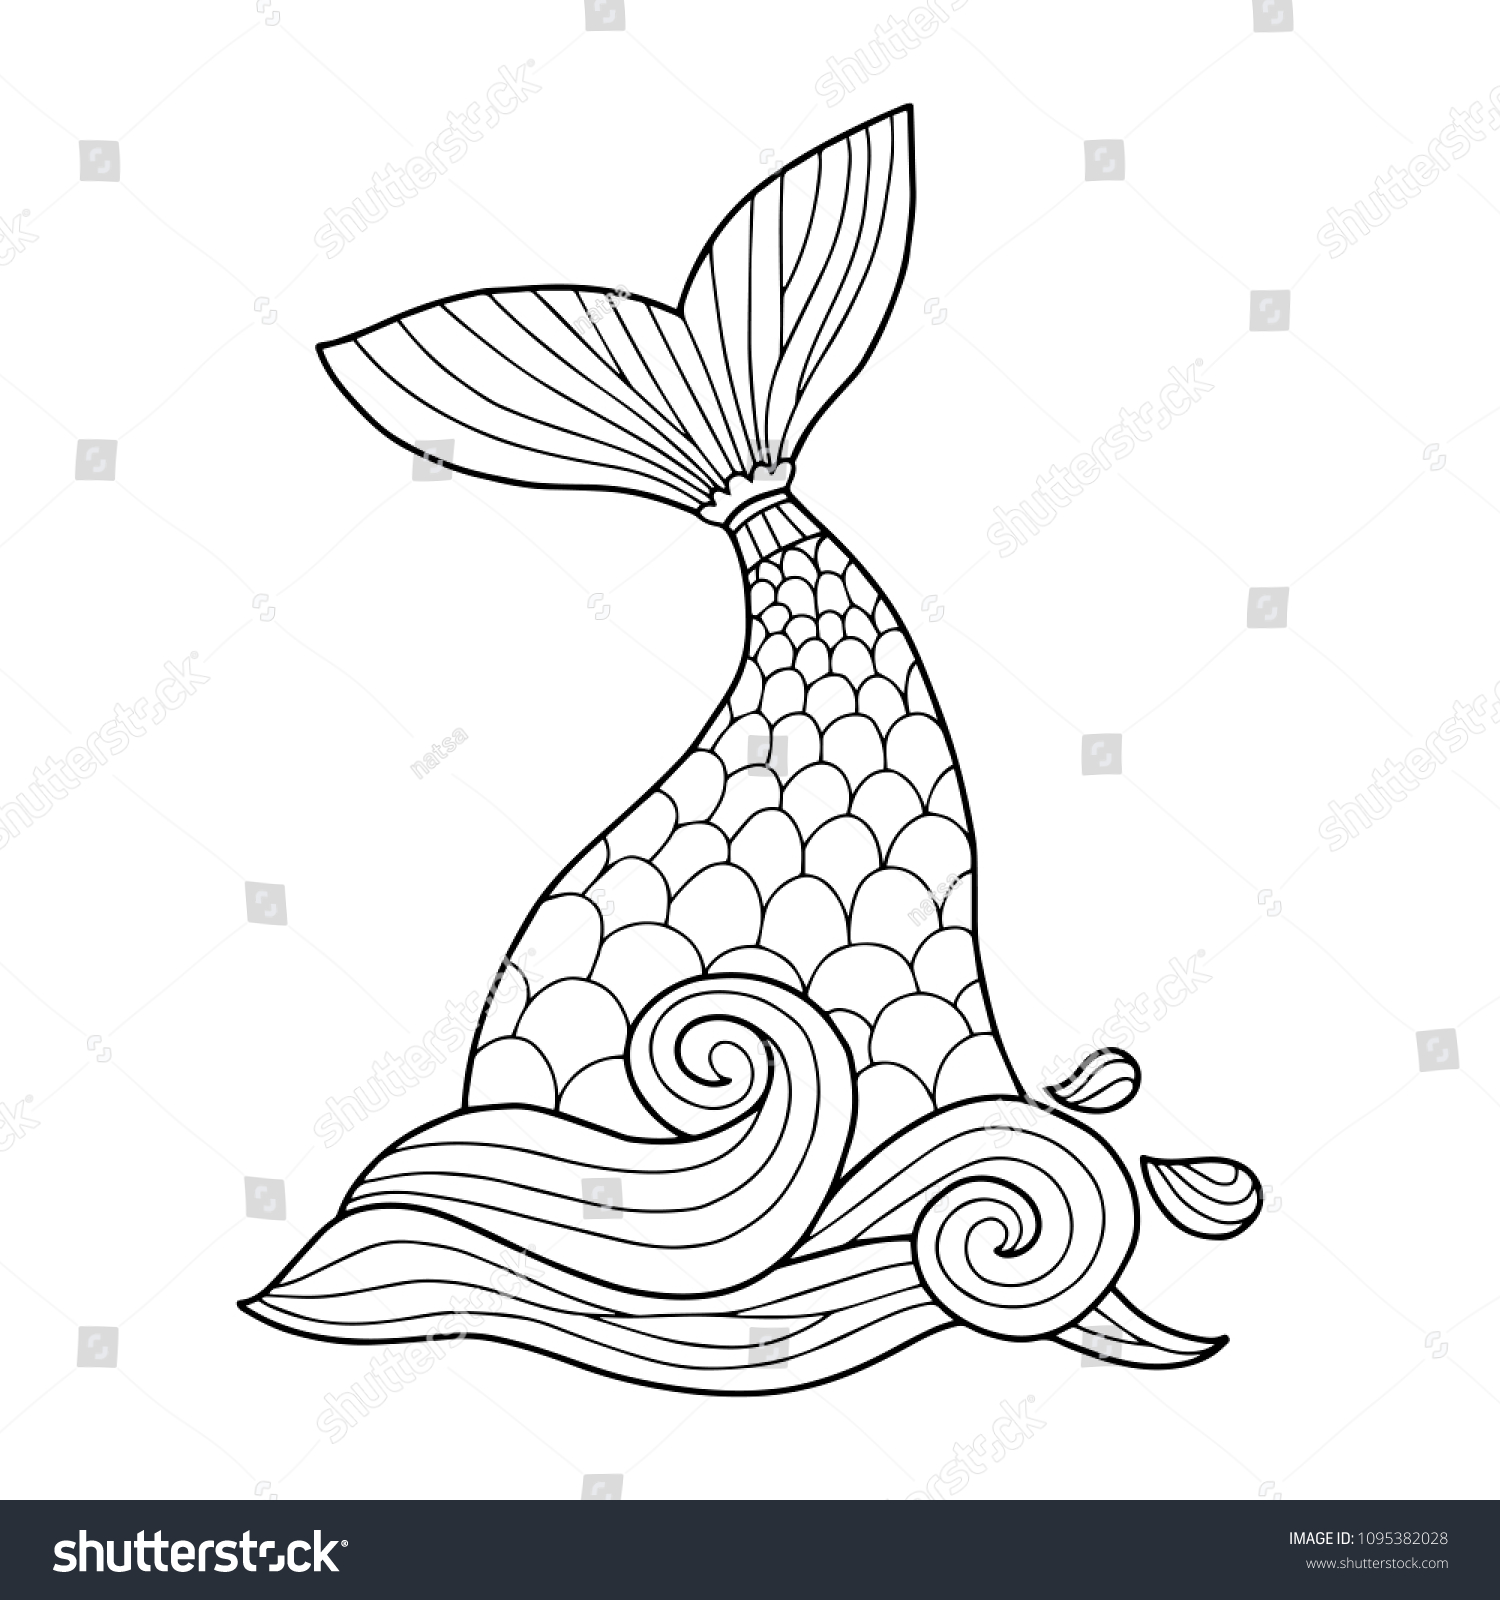 Vector mermaid tail illustration perfect coloring stock vector royalty free